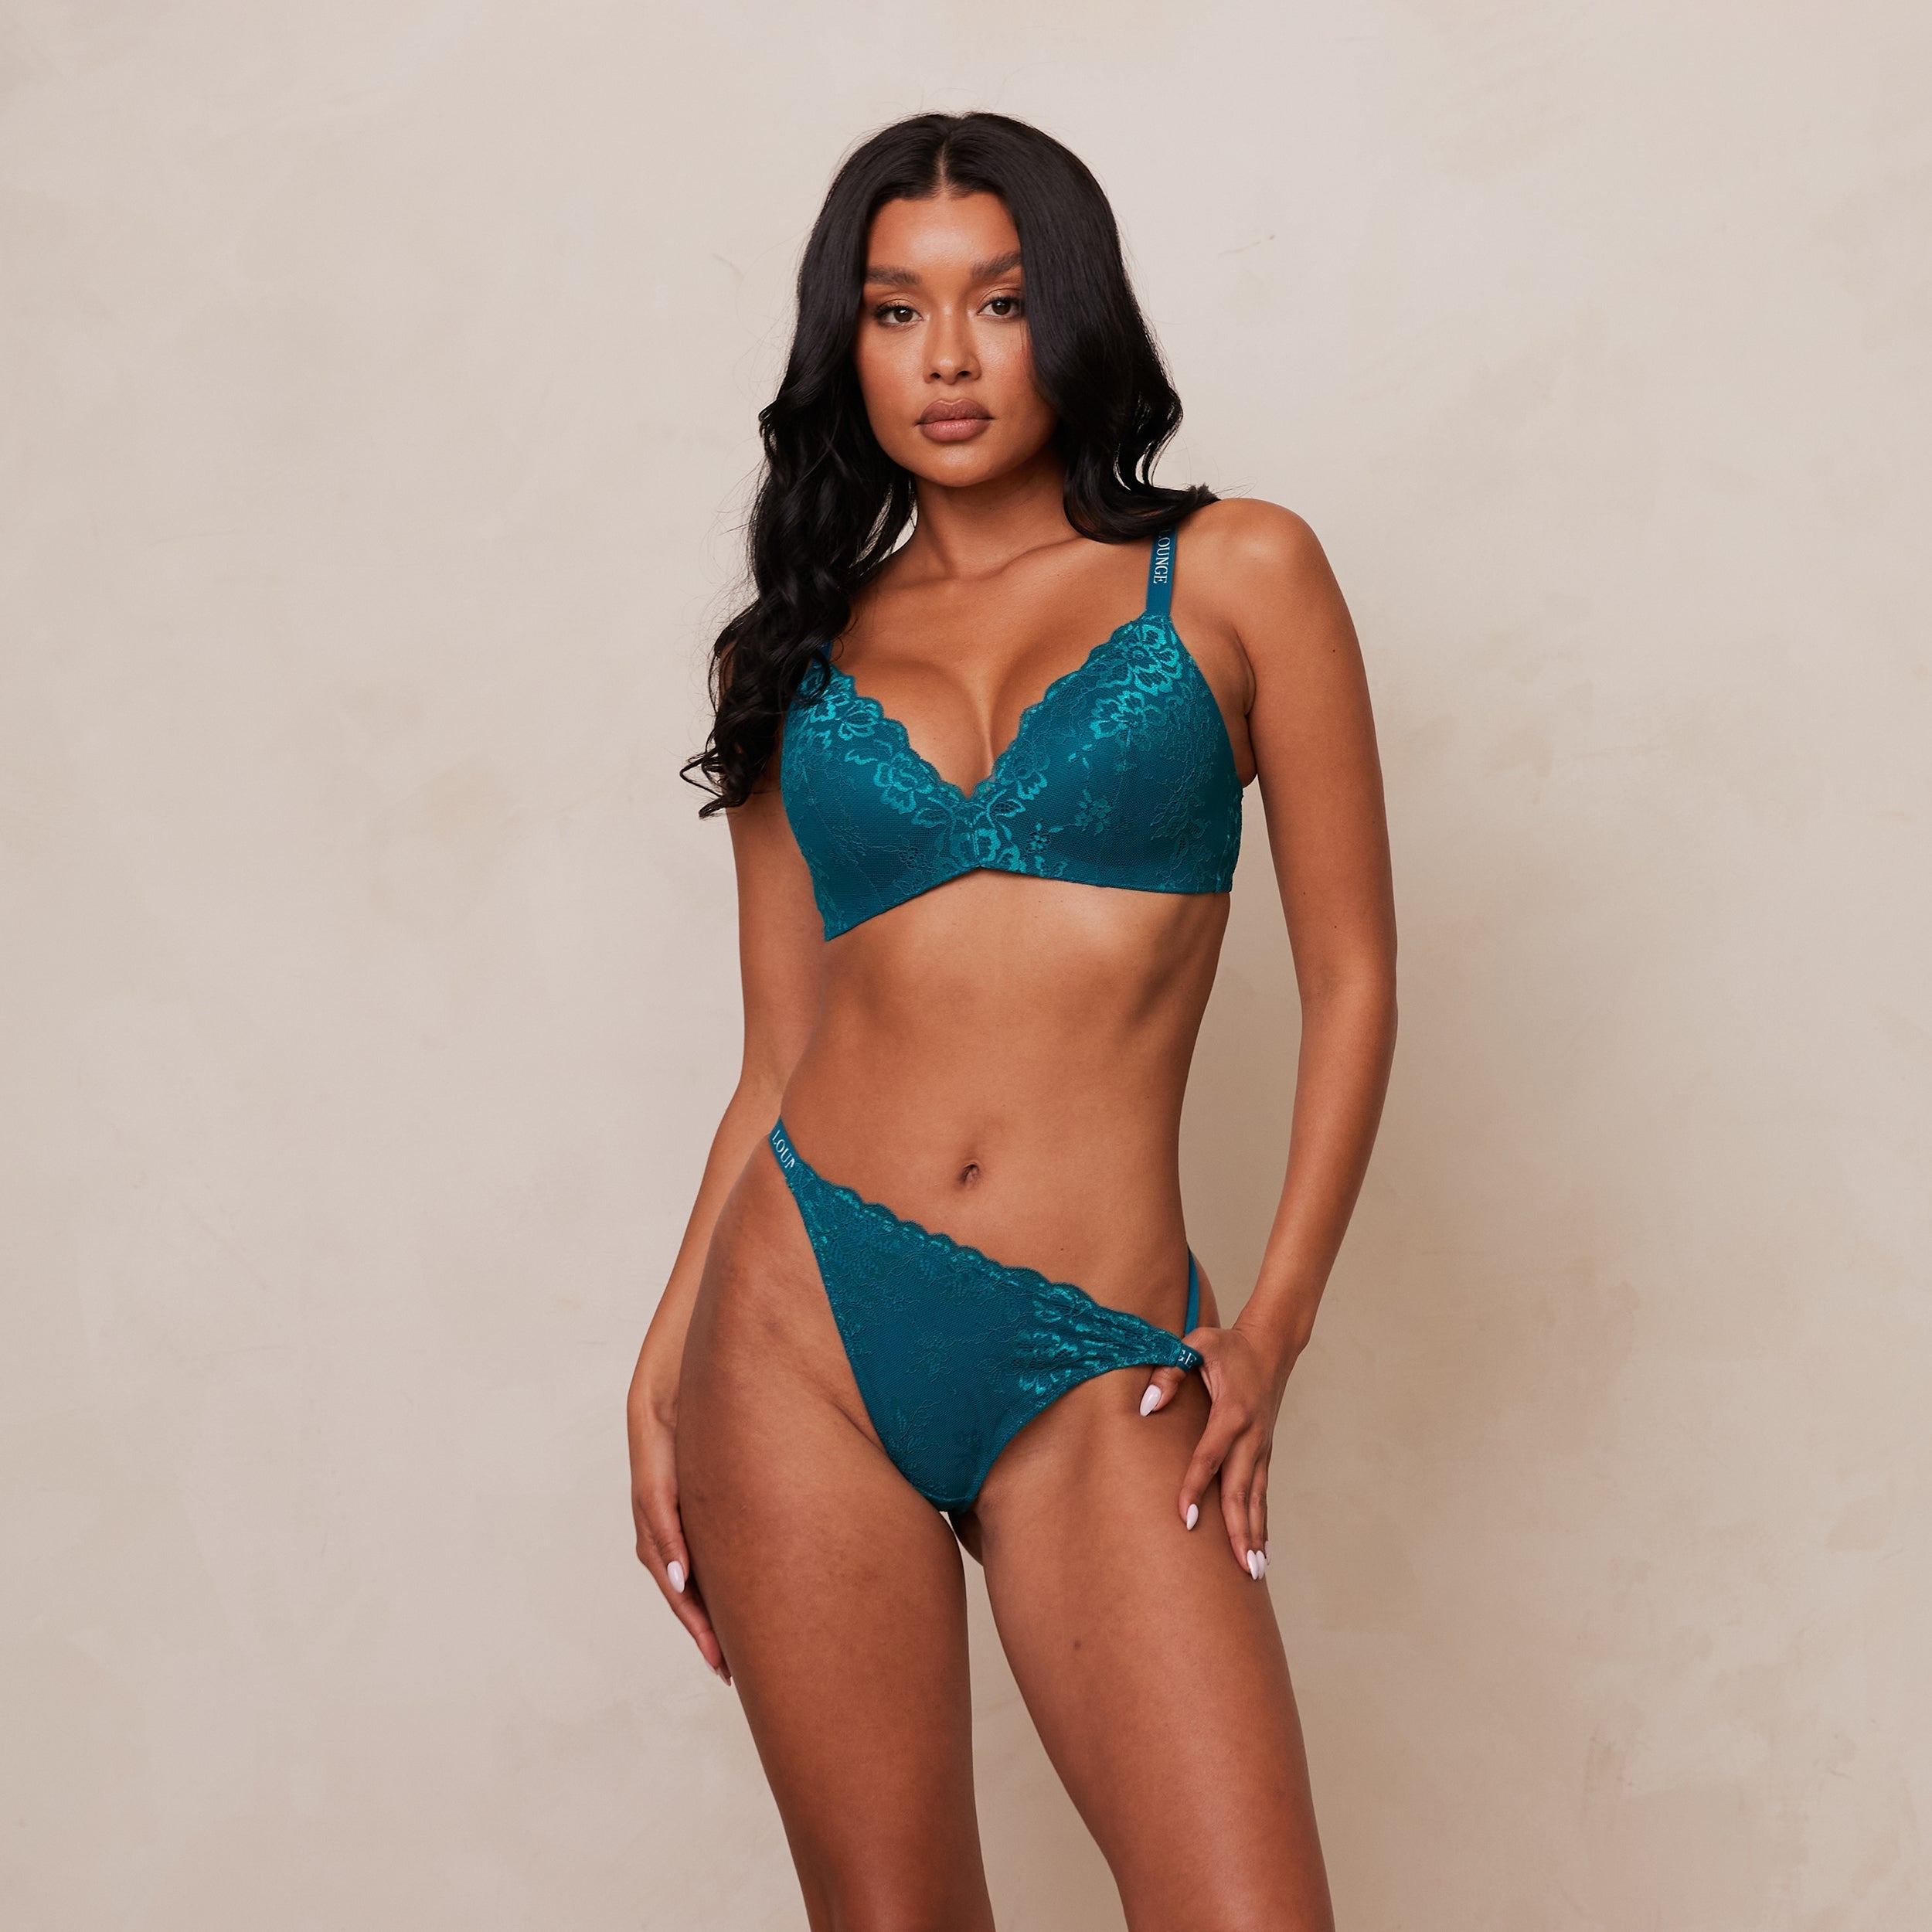 NATIVE INTIMATES - NEW - SIZE: SMALL - SOFY TEAL LACE THONG PANTY - 1.5  SIDES